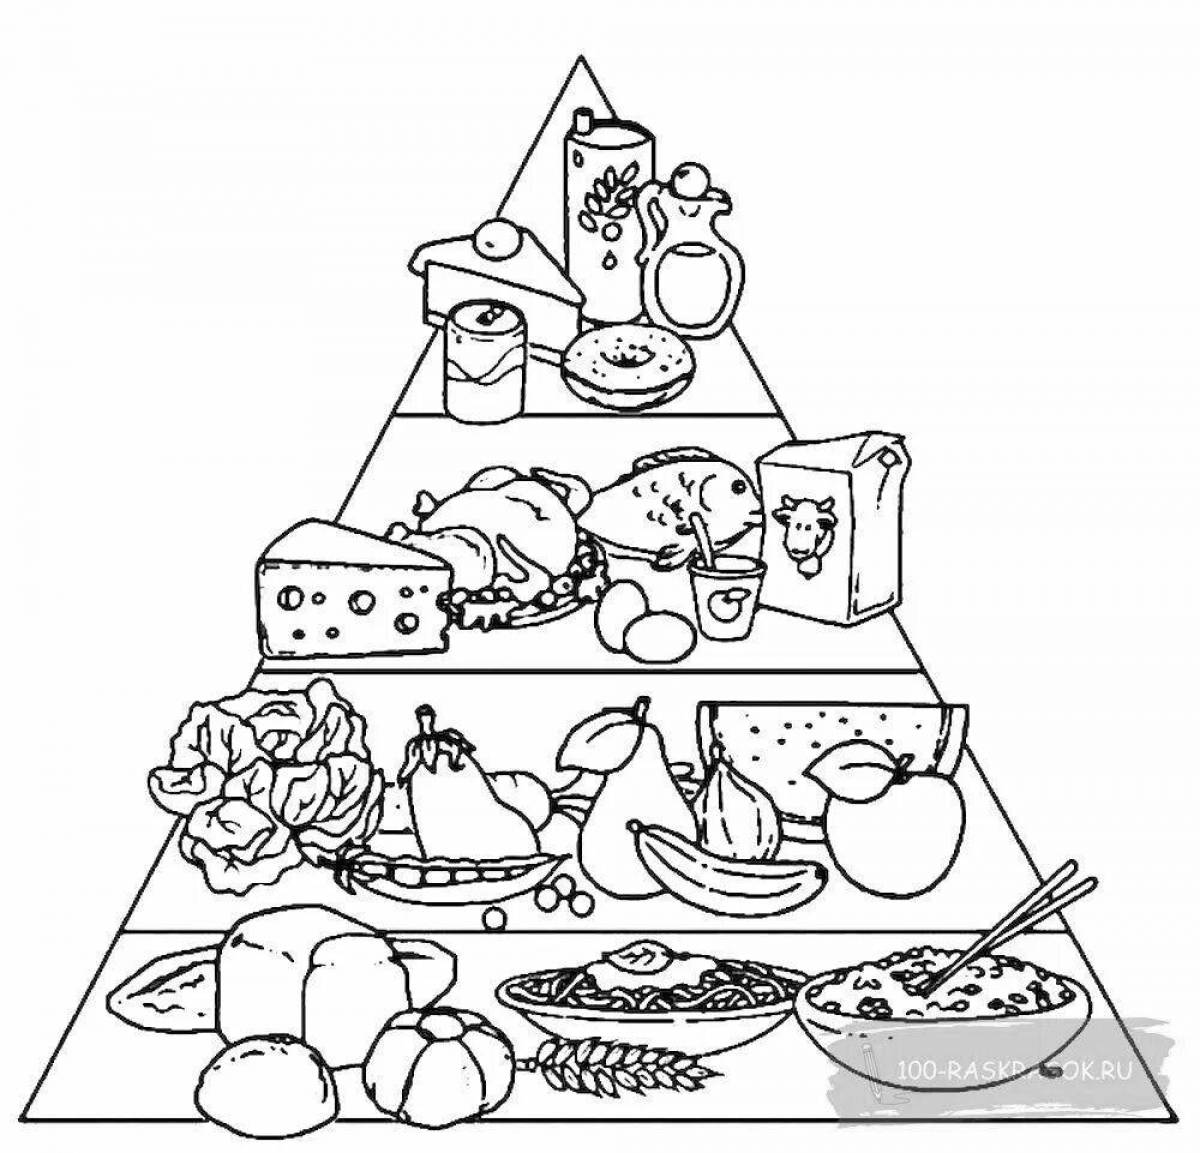 Colorful coloring book about proper nutrition